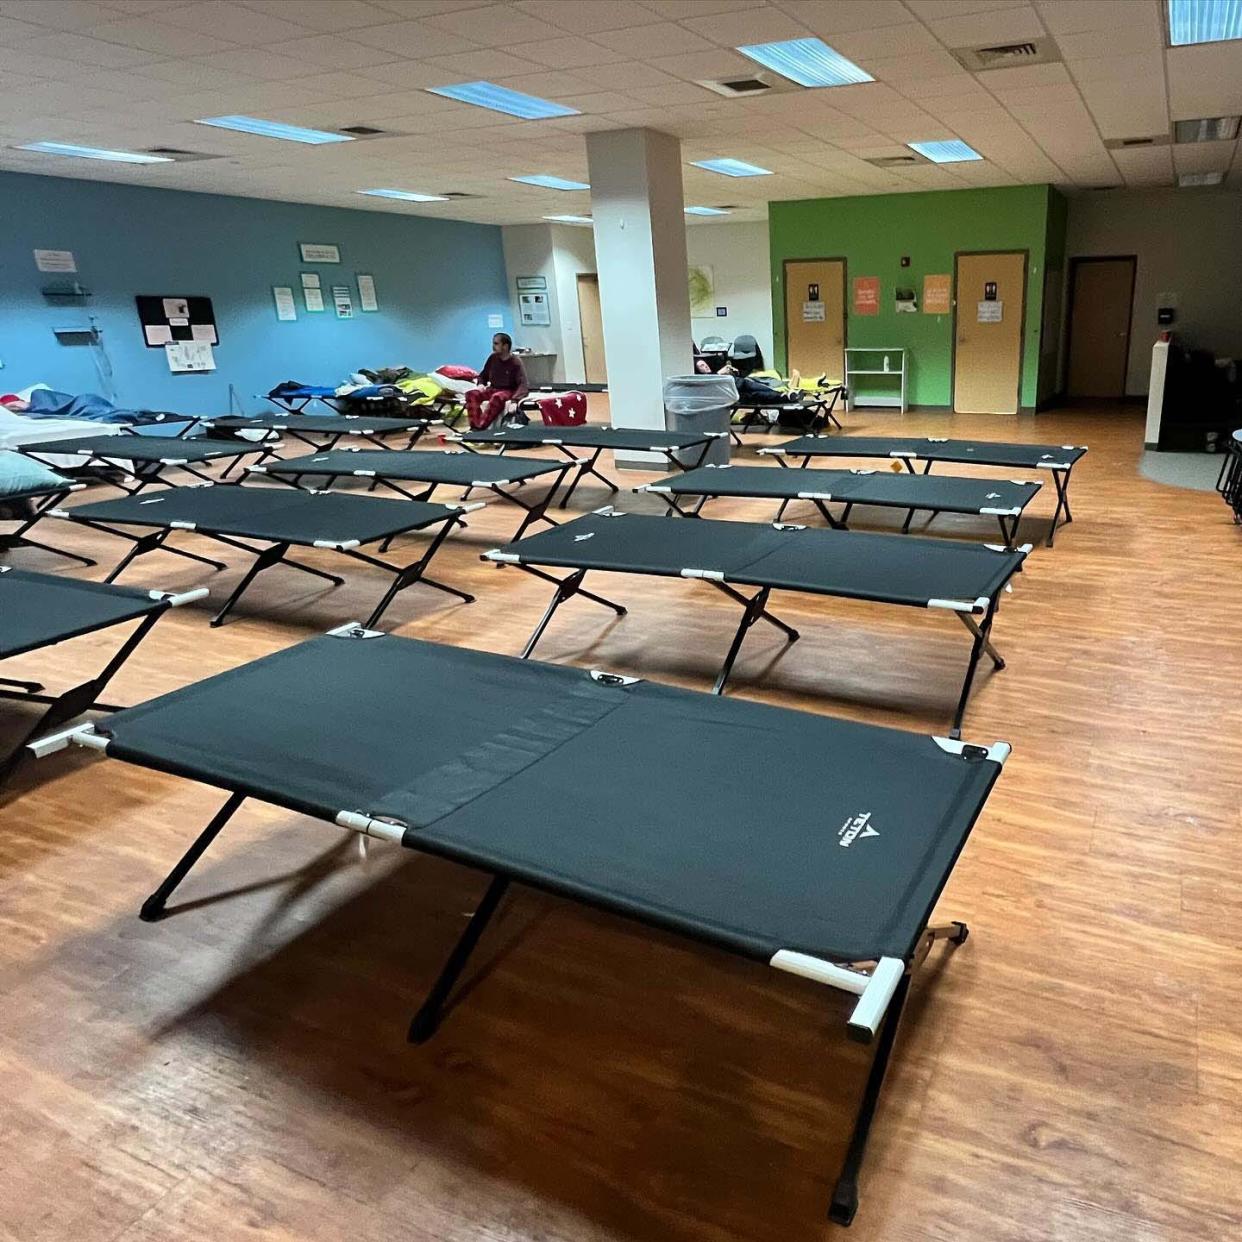 Fig Tree Knoxville purchased 25 cots in preparation for life-threatening cold temperatures. The facility gave respite from the cold to 185 guests over seven days.